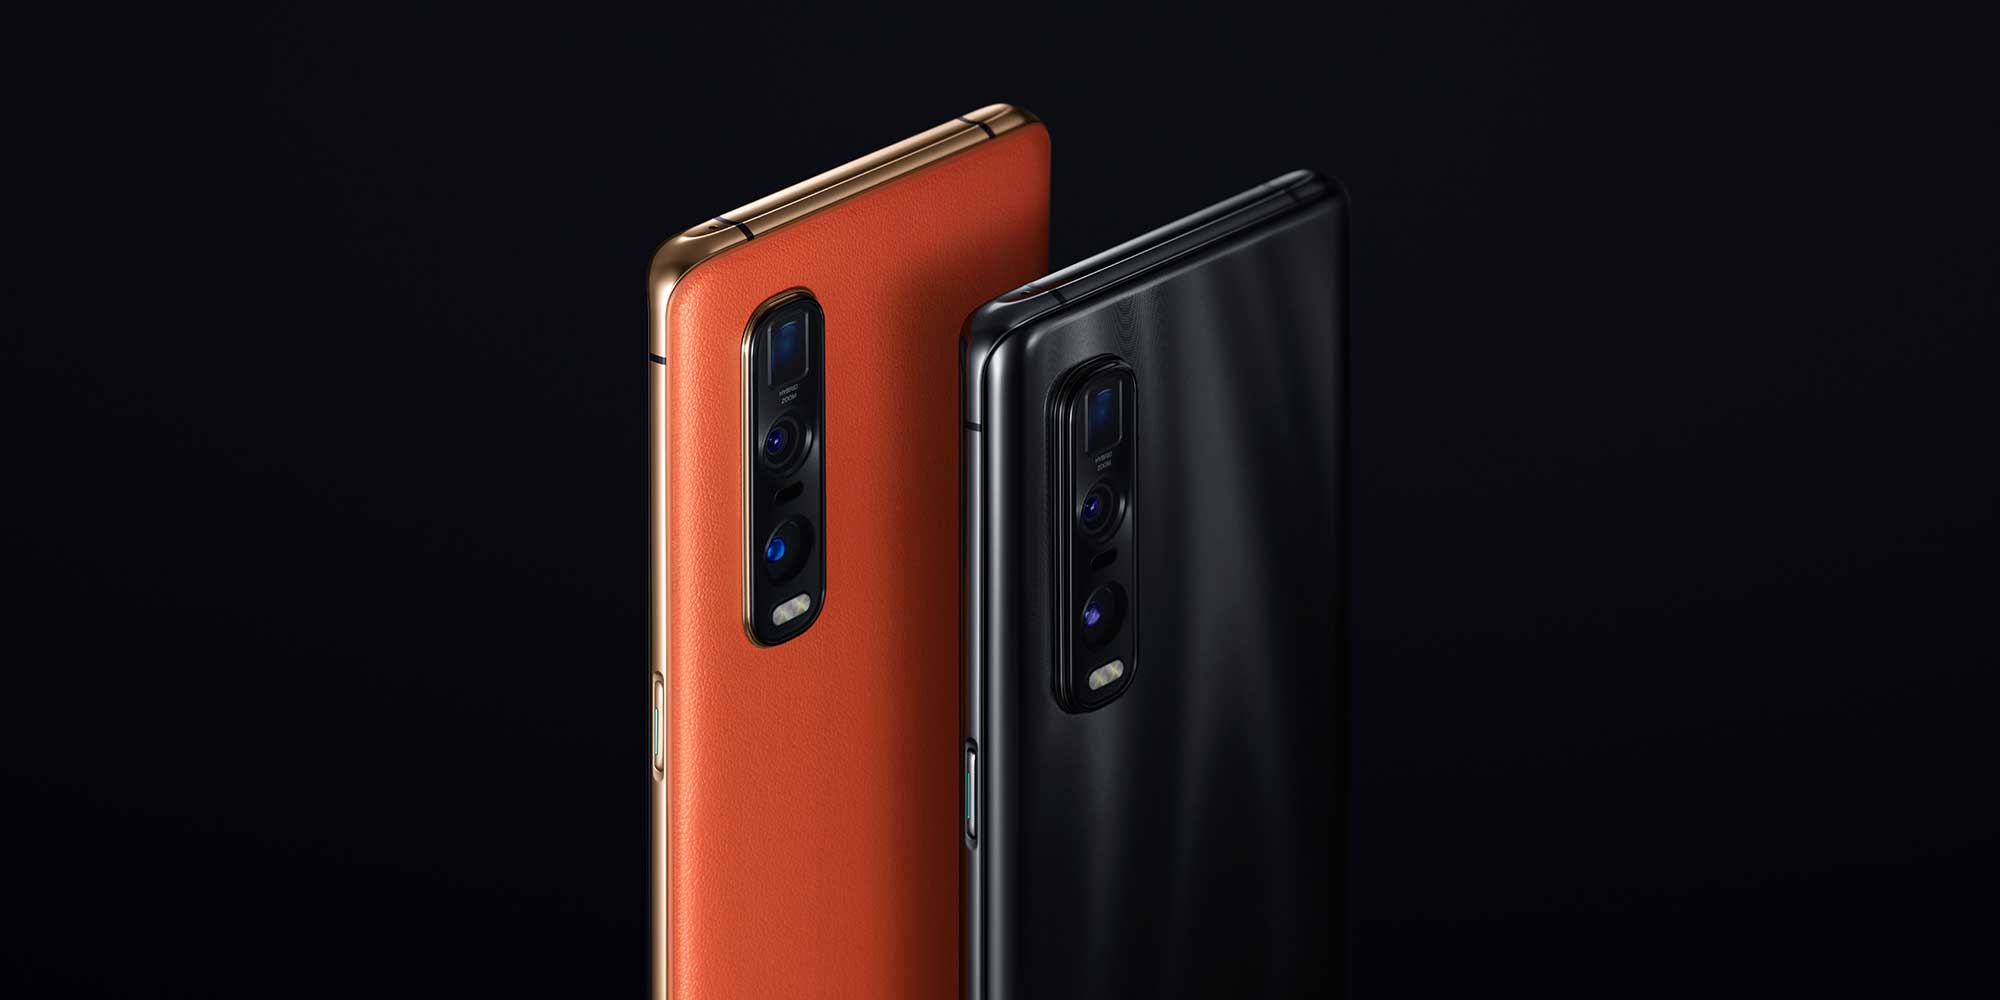 OPPO Find X2 Pro 5g launched features specifications camera battery chipset display design price sale